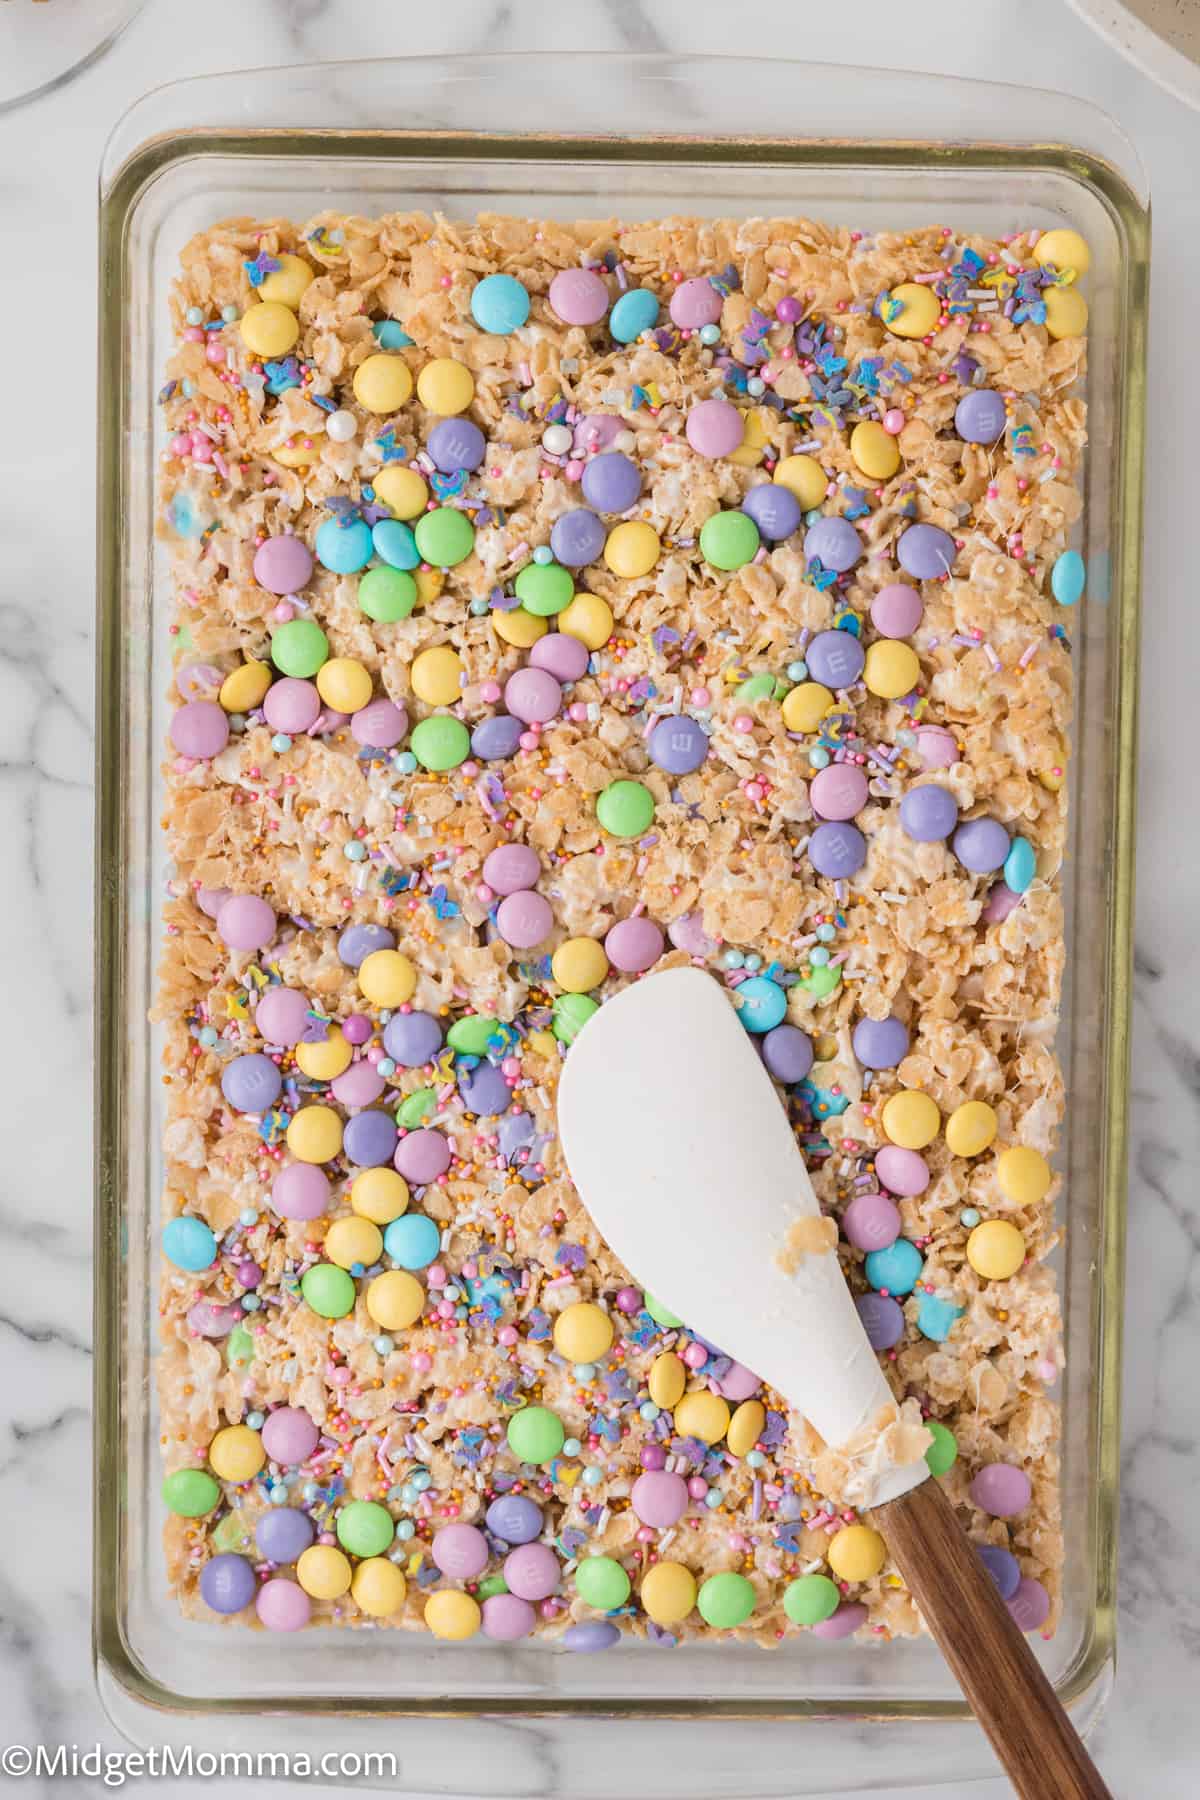 A baking sheet with colorful sprinkles and candy-coated chocolates scattered over marshmallow cereal bars, with a white spatula resting on the surface.